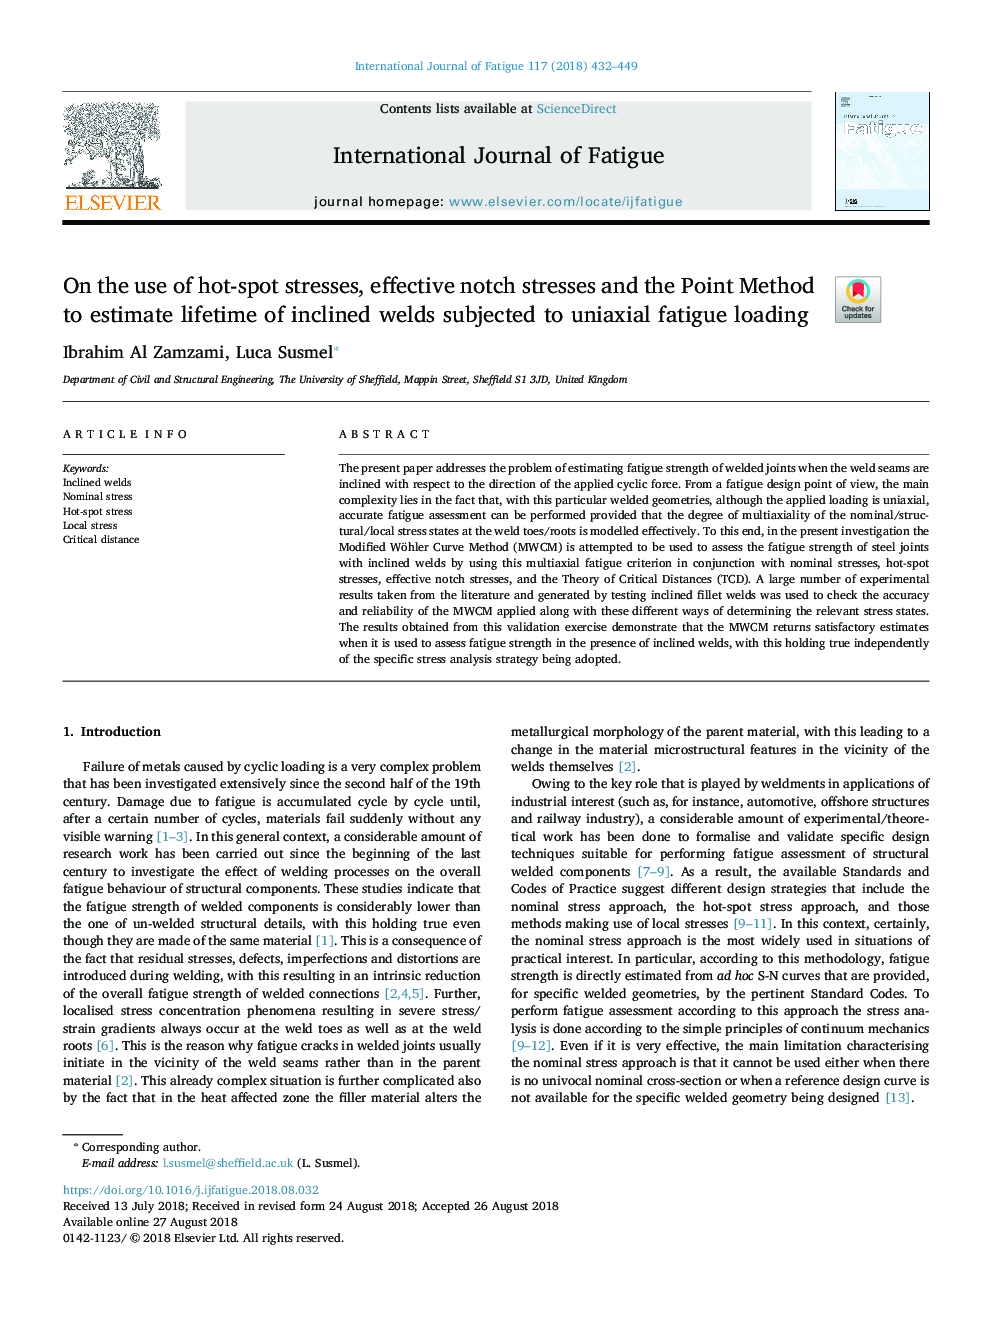 On the use of hot-spot stresses, effective notch stresses and the Point Method to estimate lifetime of inclined welds subjected to uniaxial fatigue loading